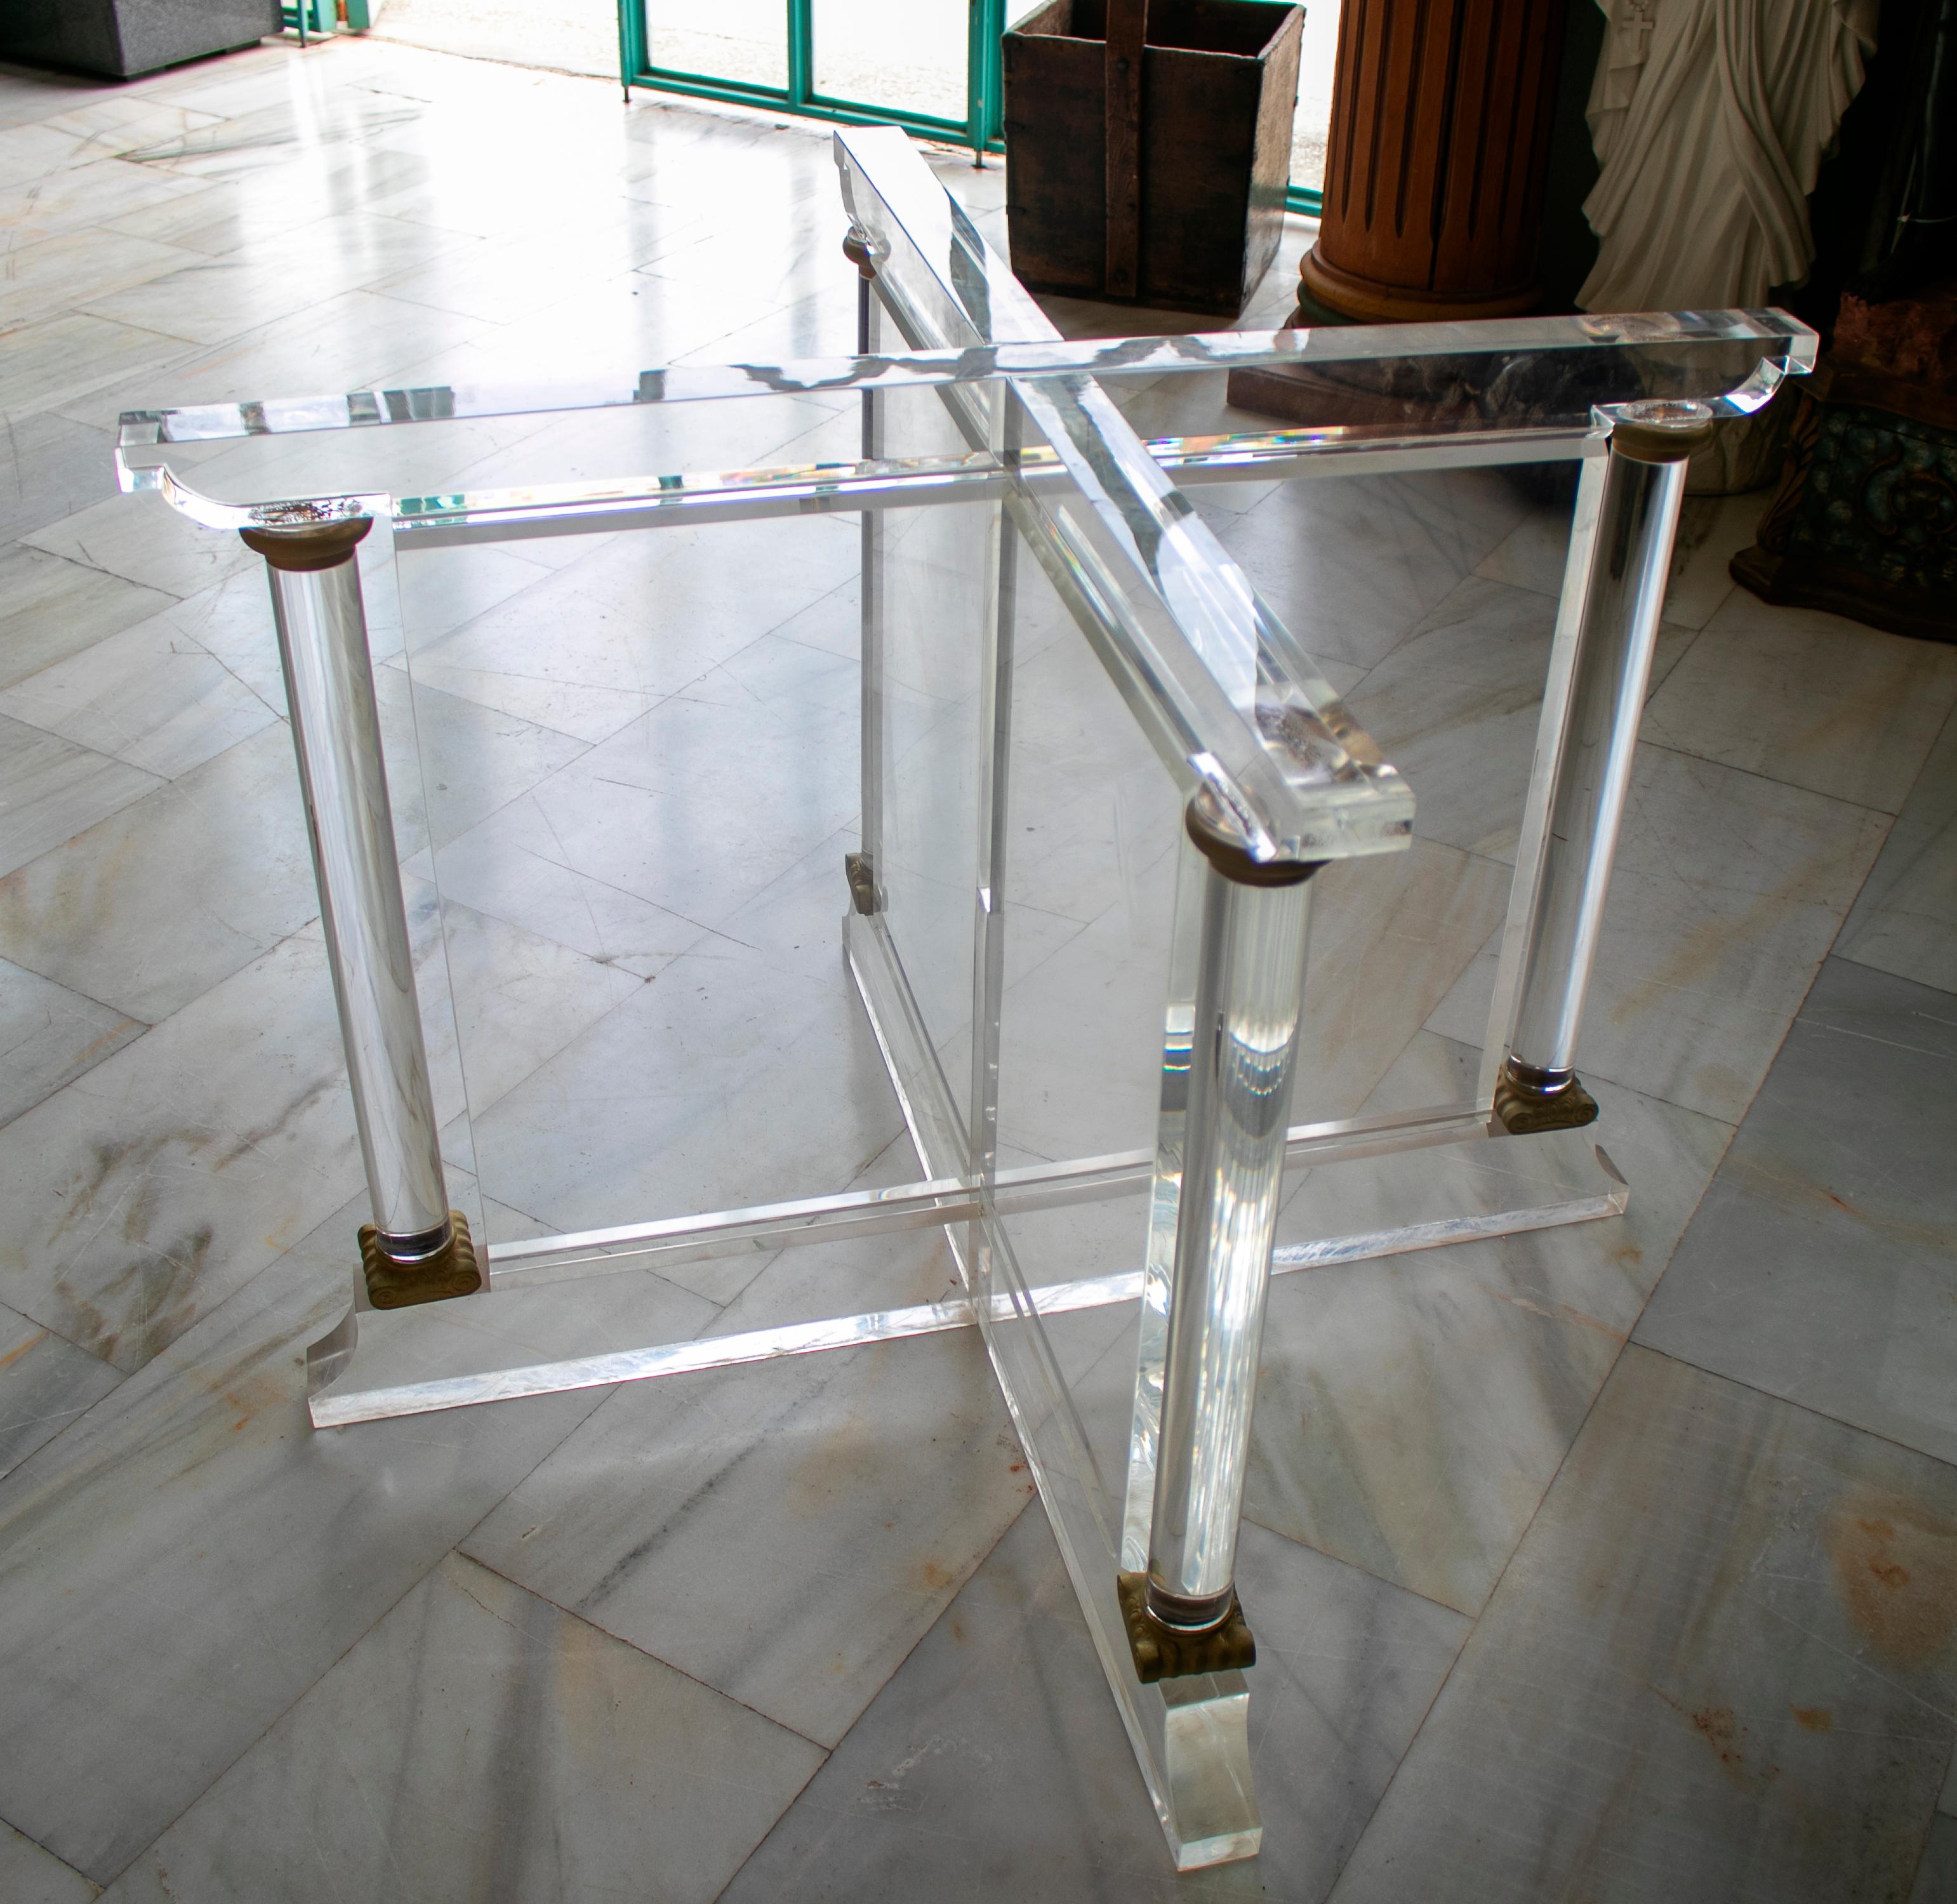 1970s Spanish methacrylate table base with bronze fittings.